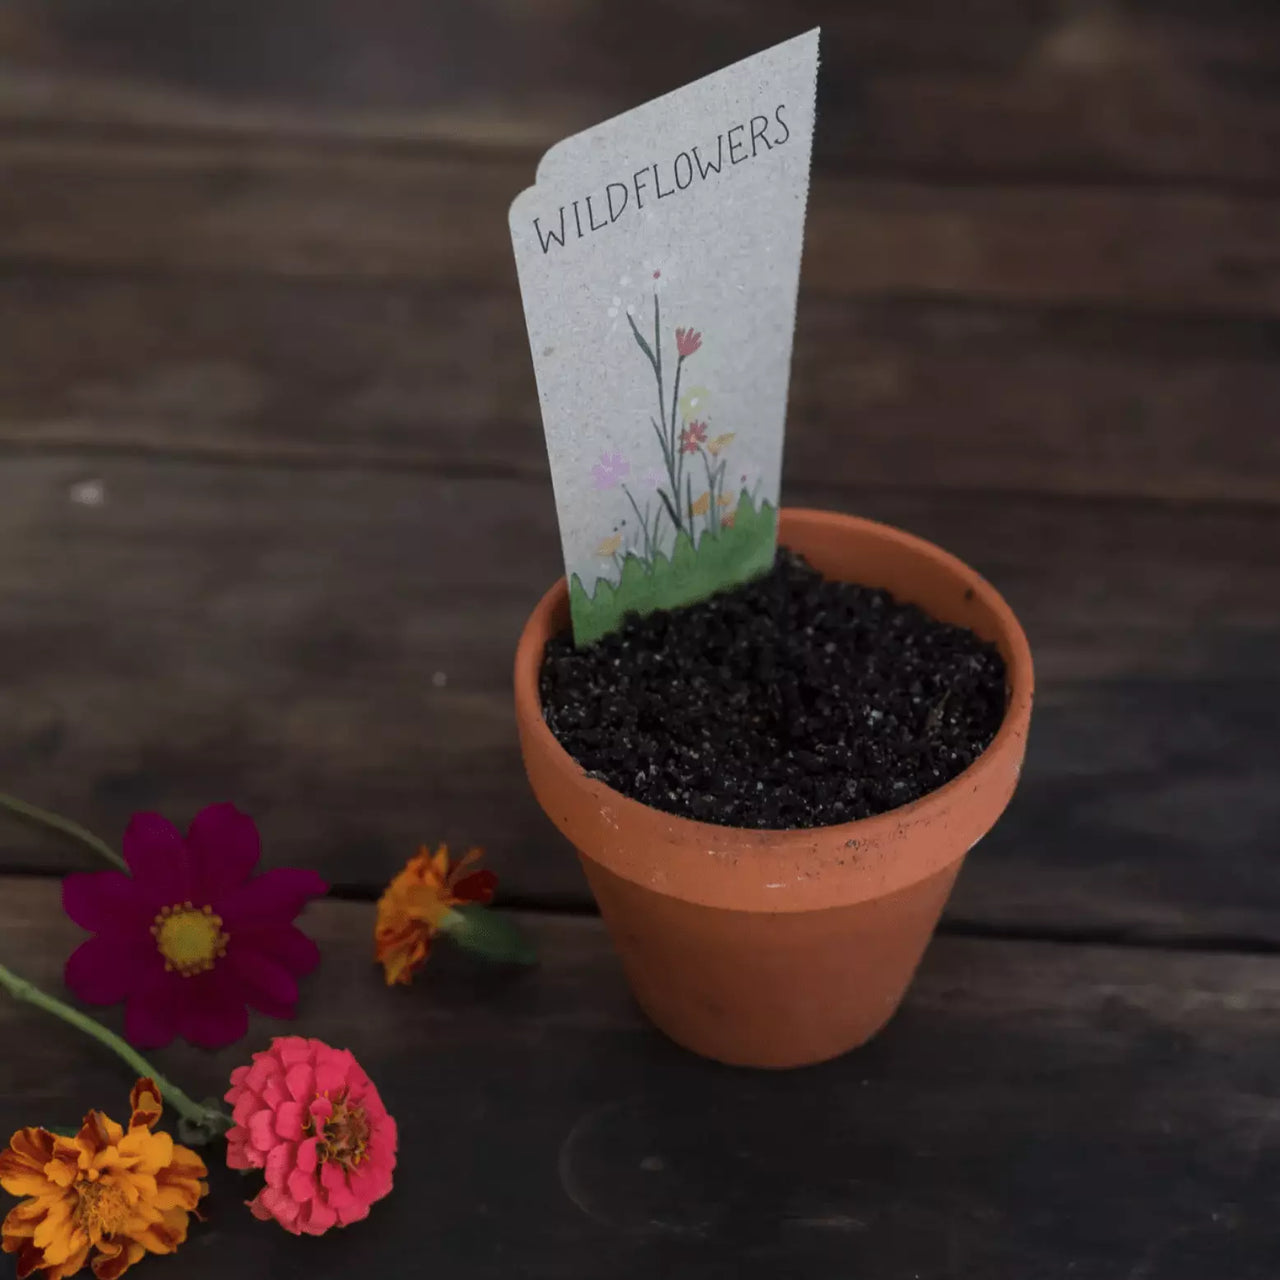 A small pot with Wildflowers seeds and a note on it from Sow n Sow.